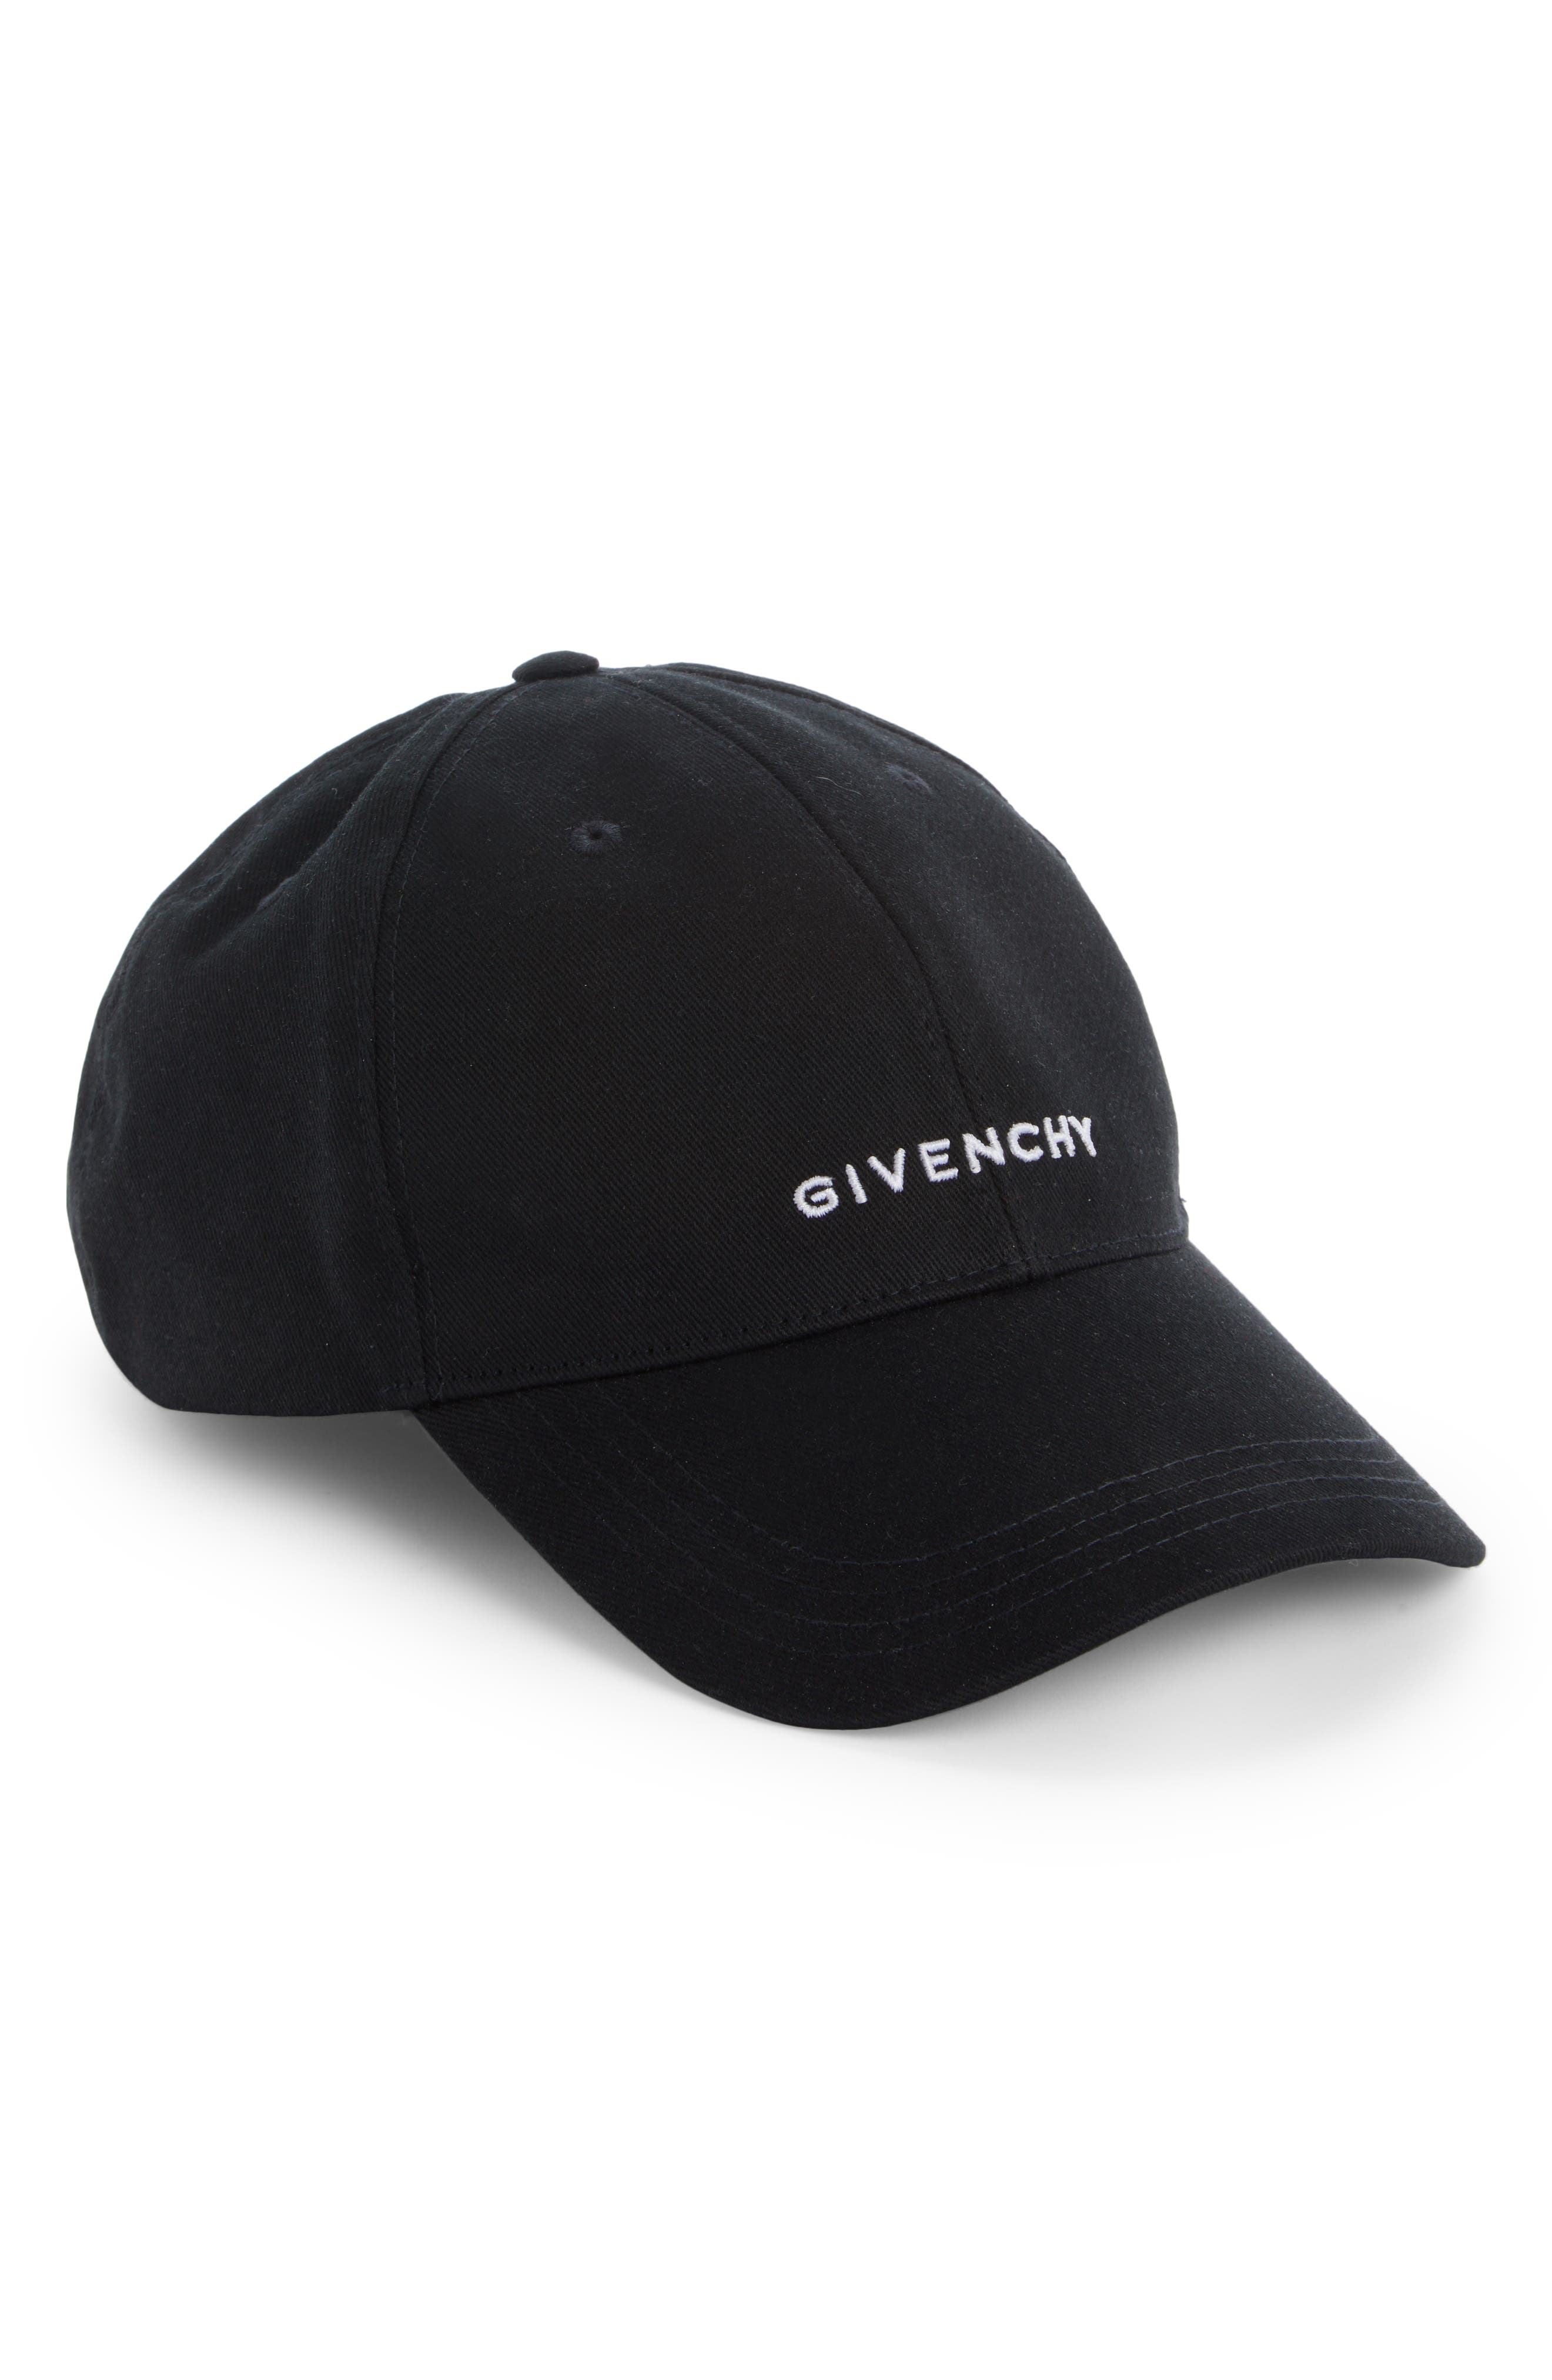 givenchy nordstrom